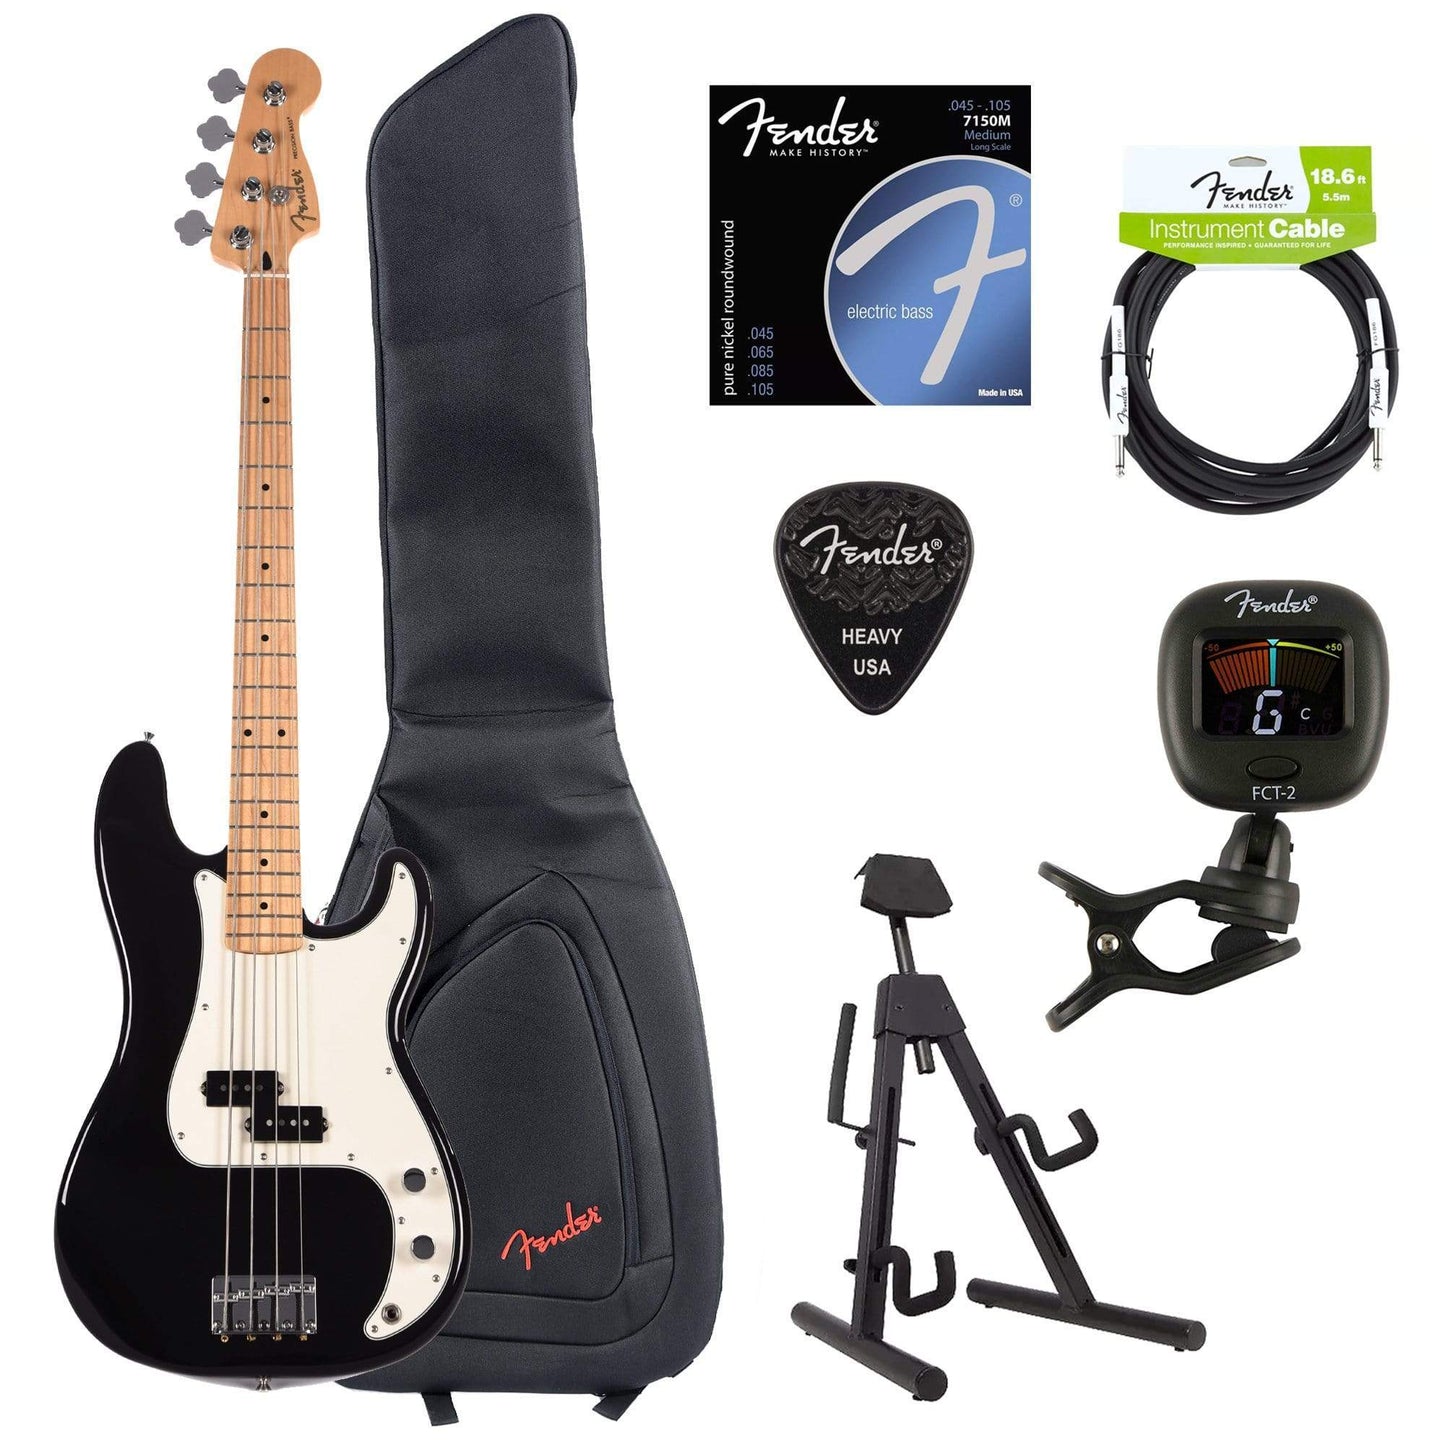 Fender Player Precision Bass Black Bundle w/Fender Gig Bag, Stand, Cable, Tuner, Picks and Strings Bass Guitars / 4-String